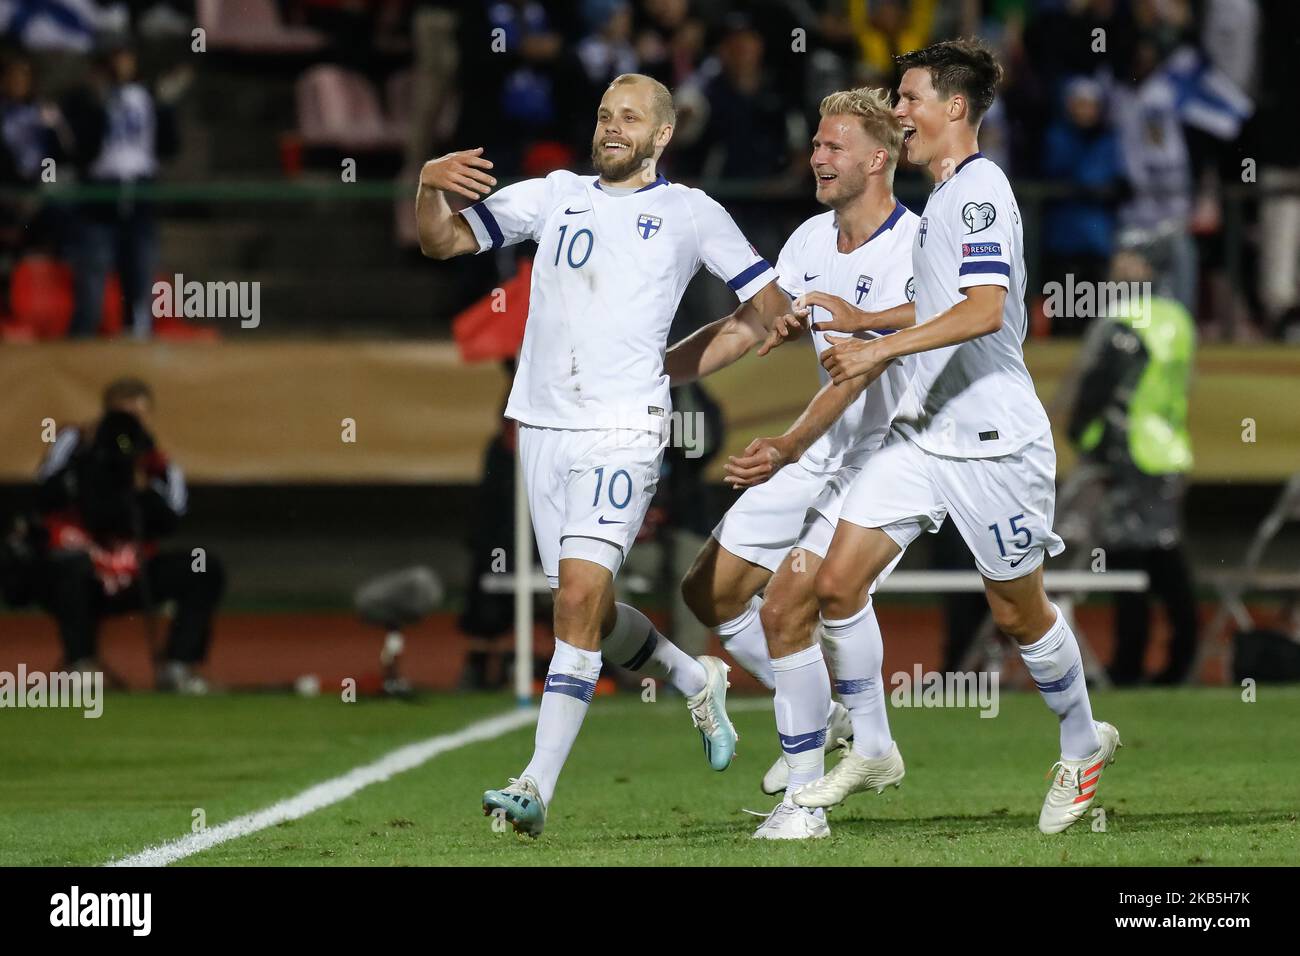 Teemu Pukki (L) of Finland celebrates his goal with Paulus Arajuuri and Sauli Vaisanen (R) during UEFA Euro 2020 qualifying match between Finland and Italy on September 8, 2019 at Ratina Stadium in Tampere, Finland. (Photo by Mike Kireev/NurPhoto) Stock Photo